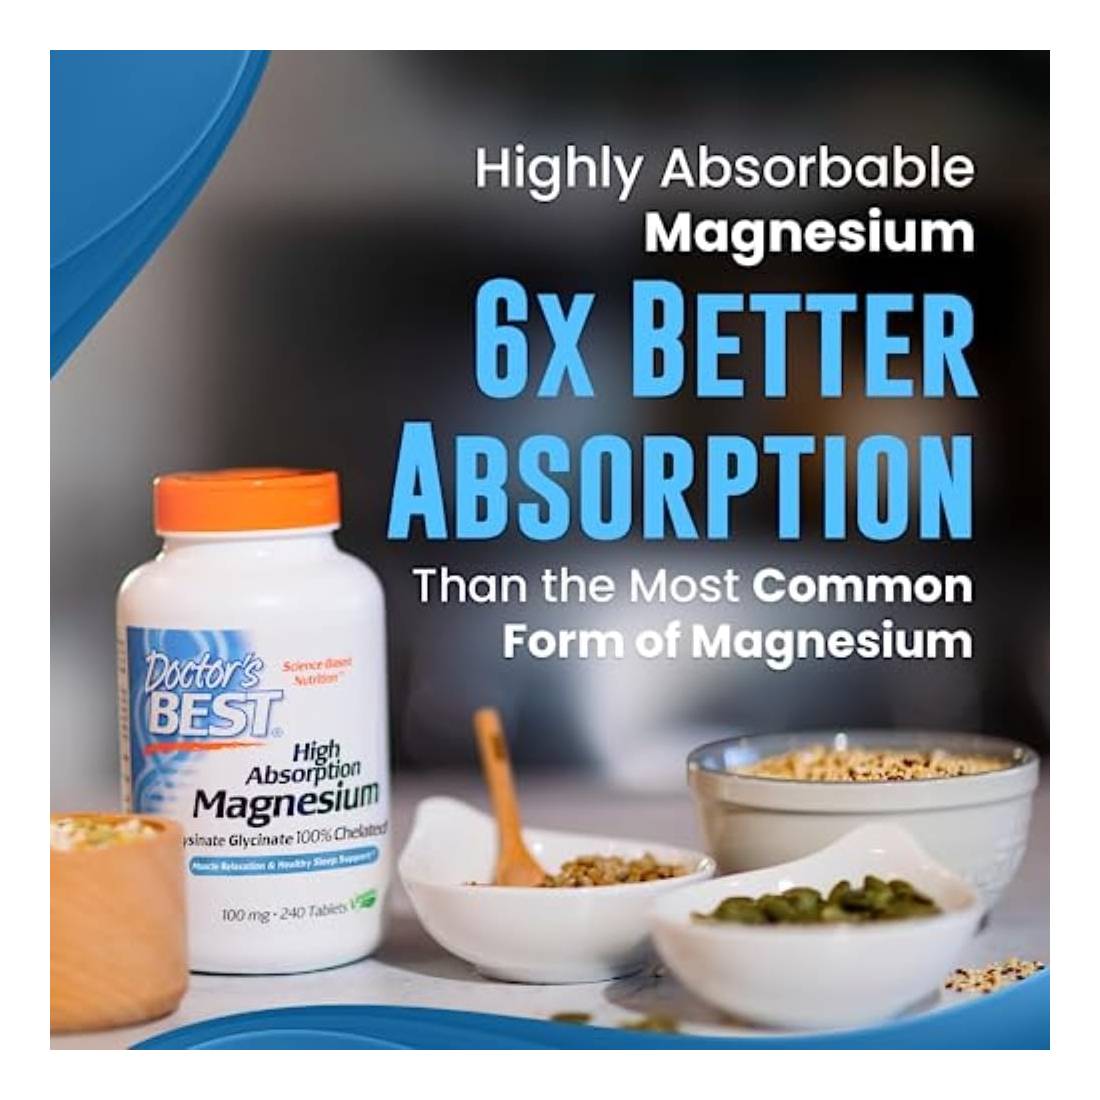 Doctor's Best High Absorption Magnesium, 100 Mg 240 Tablets